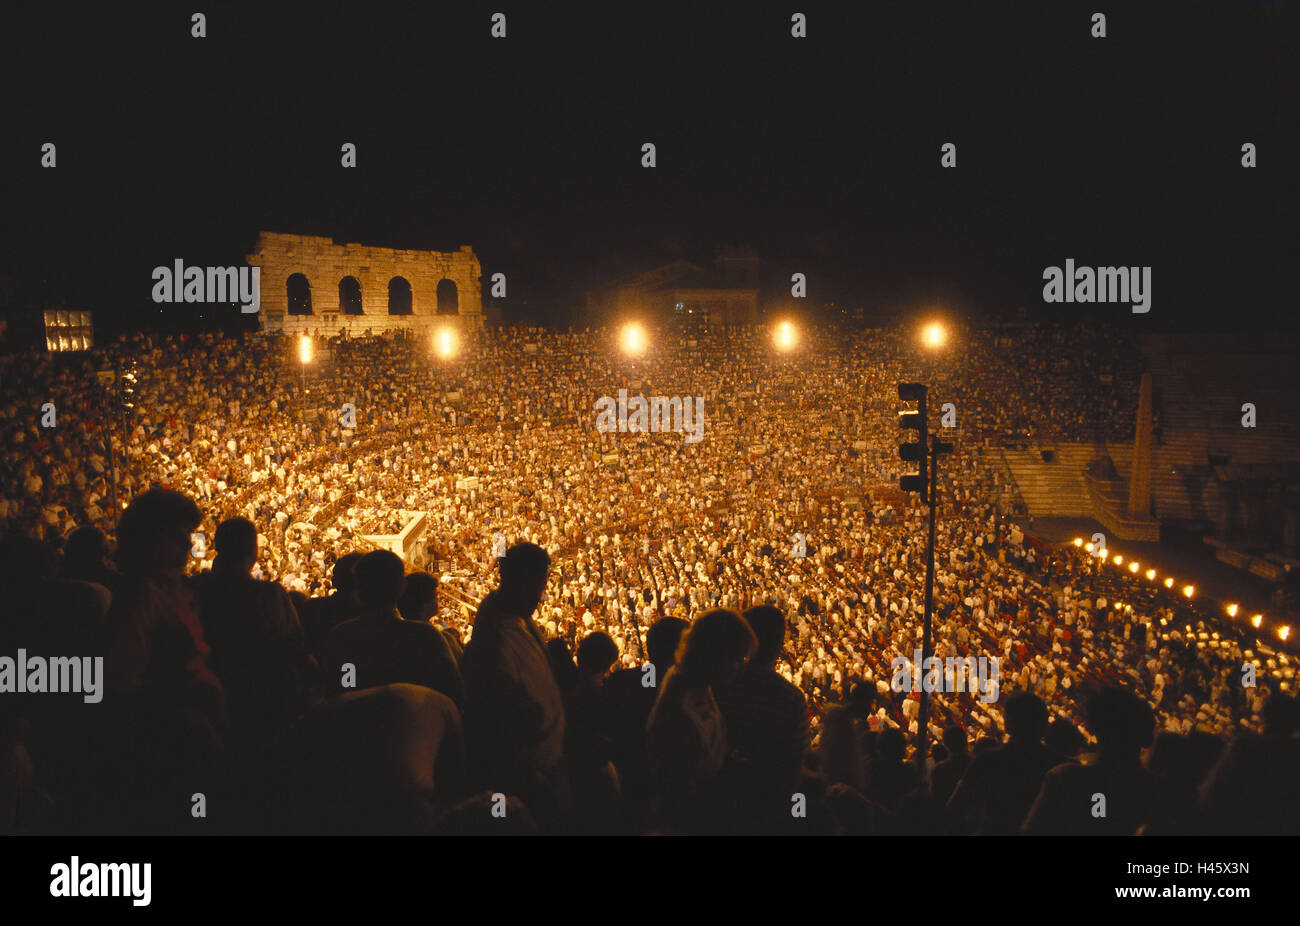 Italy, Verona, arena, event, evening, Northern Italy, amphitheatre, audience, visitor, performance, Aida, opera, person, mass, outside, film set, Stock Photo